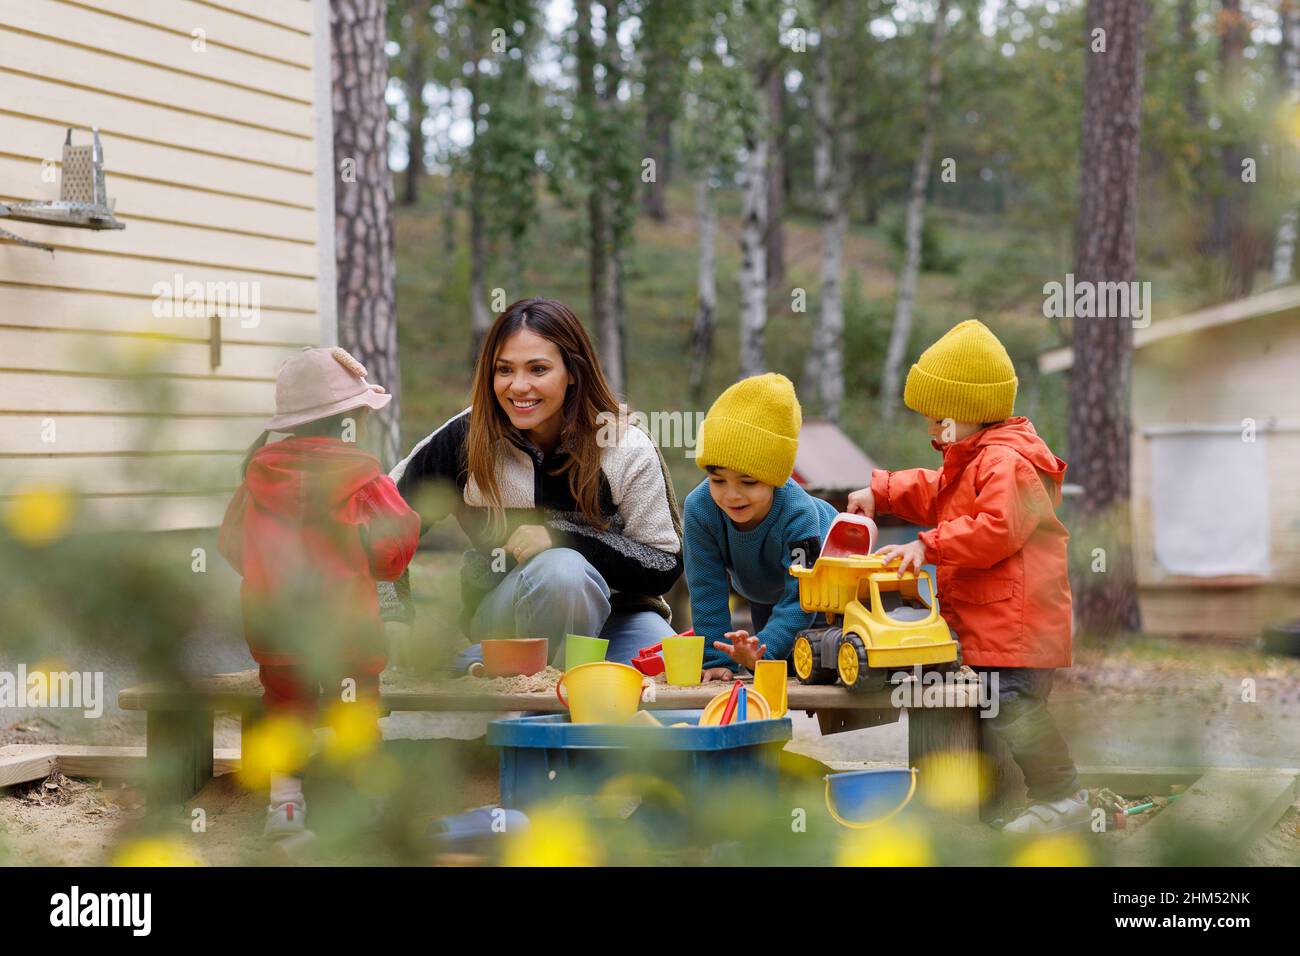 Mother playing with children in sandpit Stock Photo